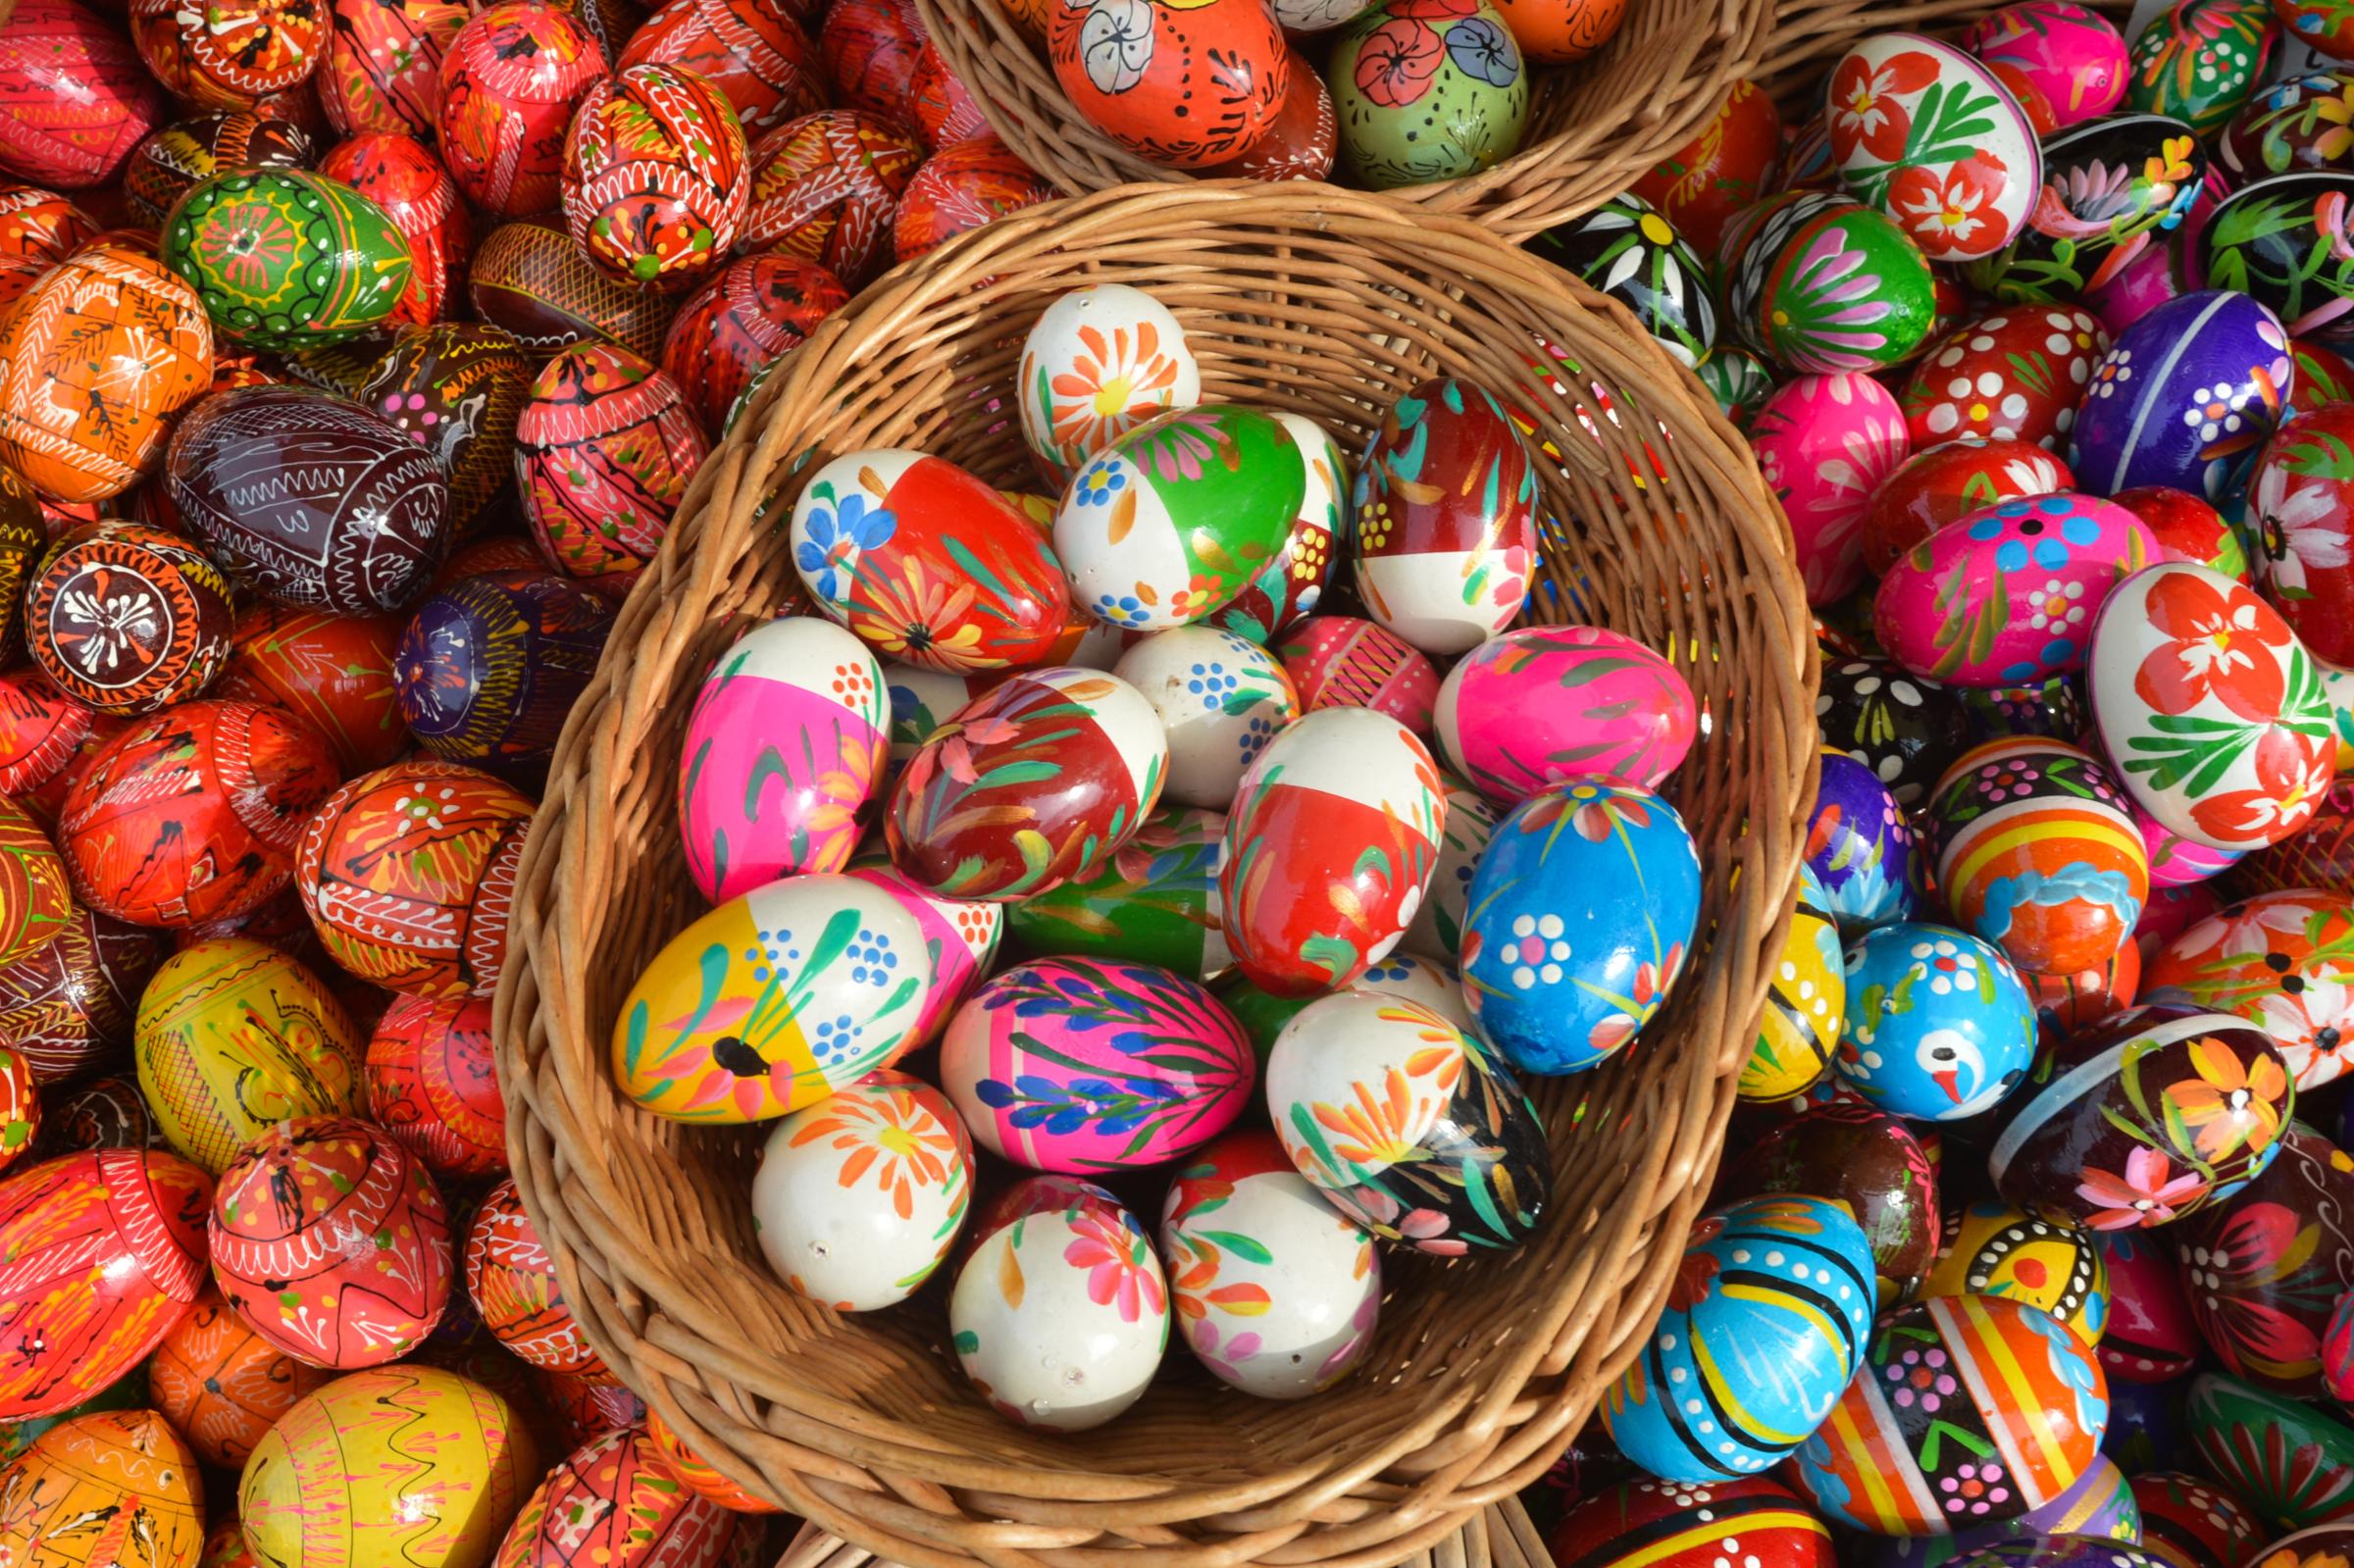 Annual Traditional Easter Market in Krakow